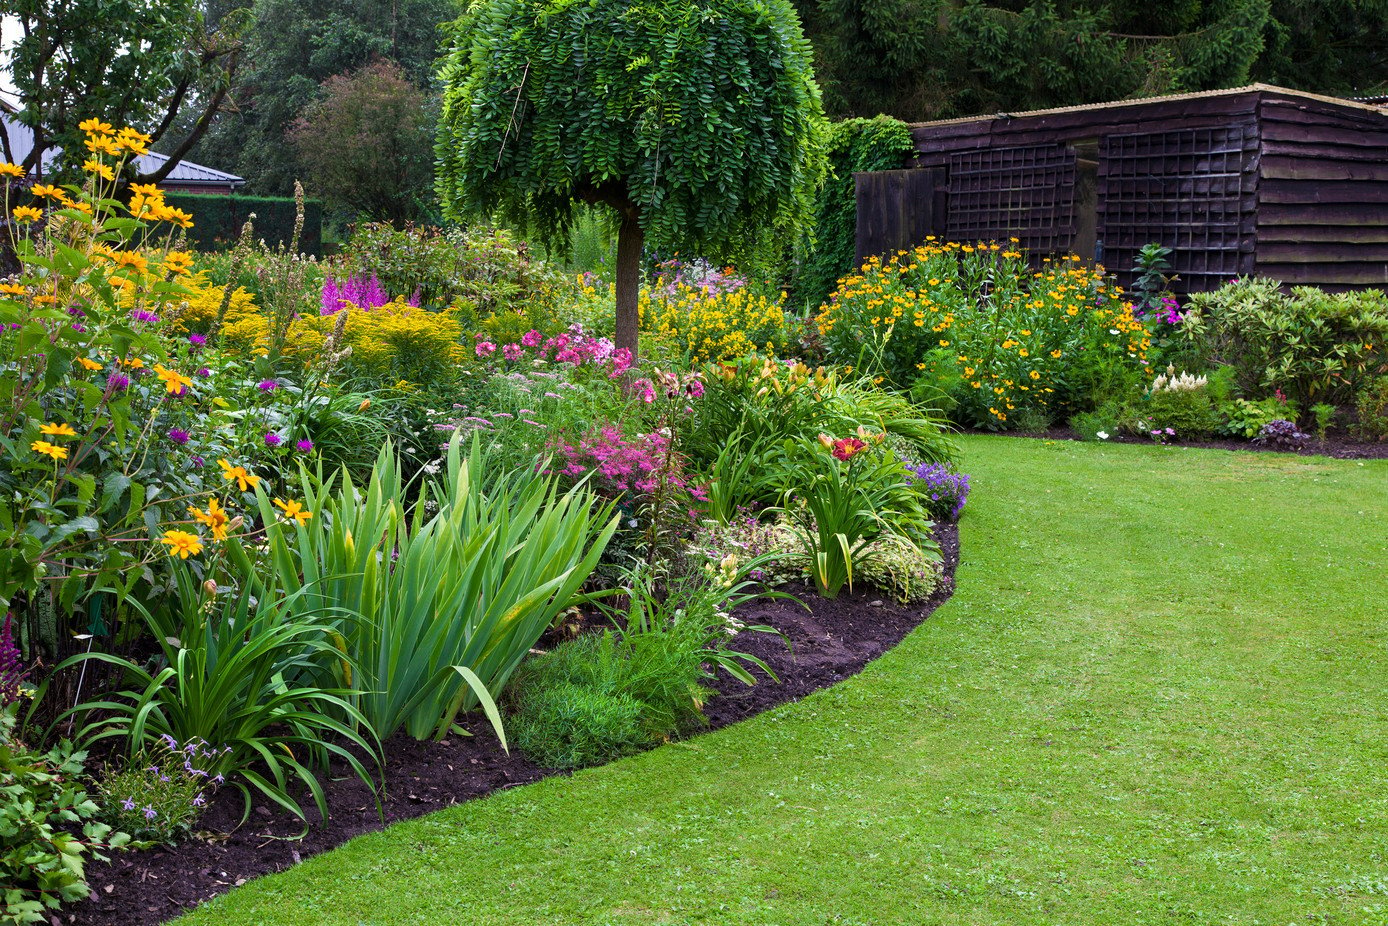 Creative Ideas To Landscape A Slope, How To Landscape A Steep Slope On A Budget